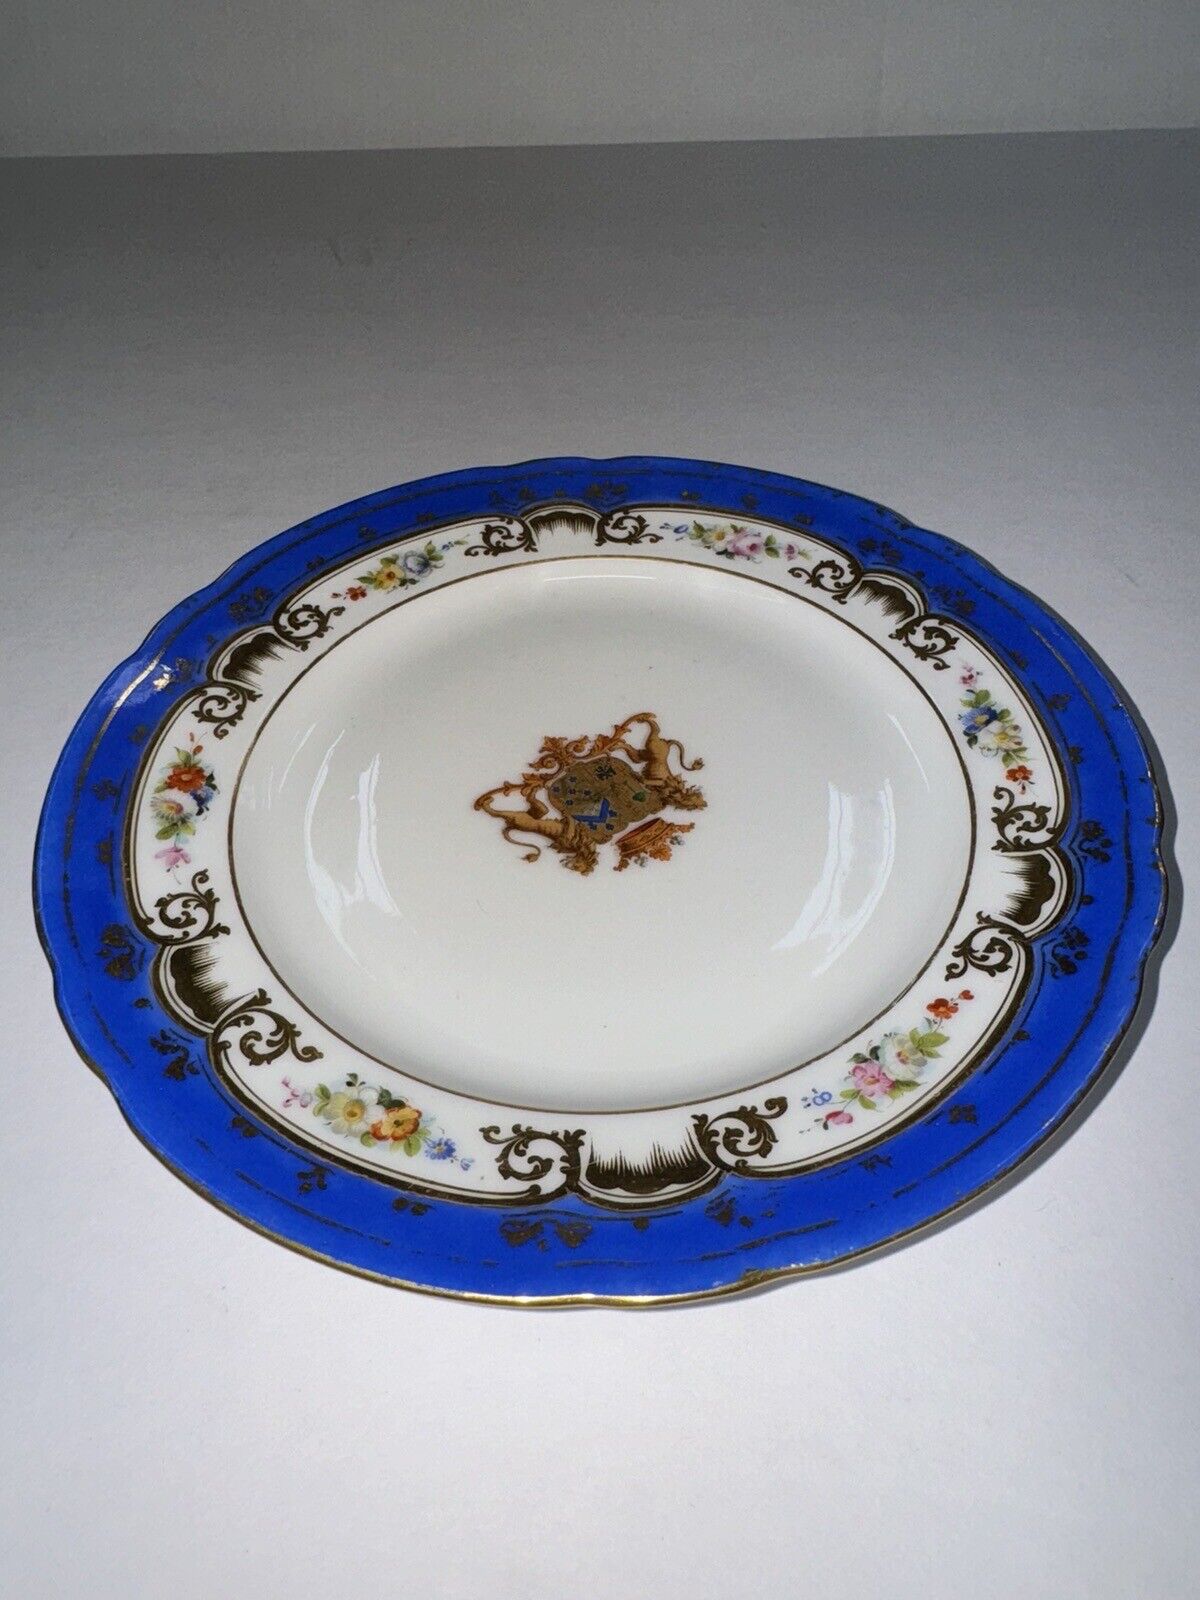 ANTIQUE ENGLISH ARMORIAL PLATE 